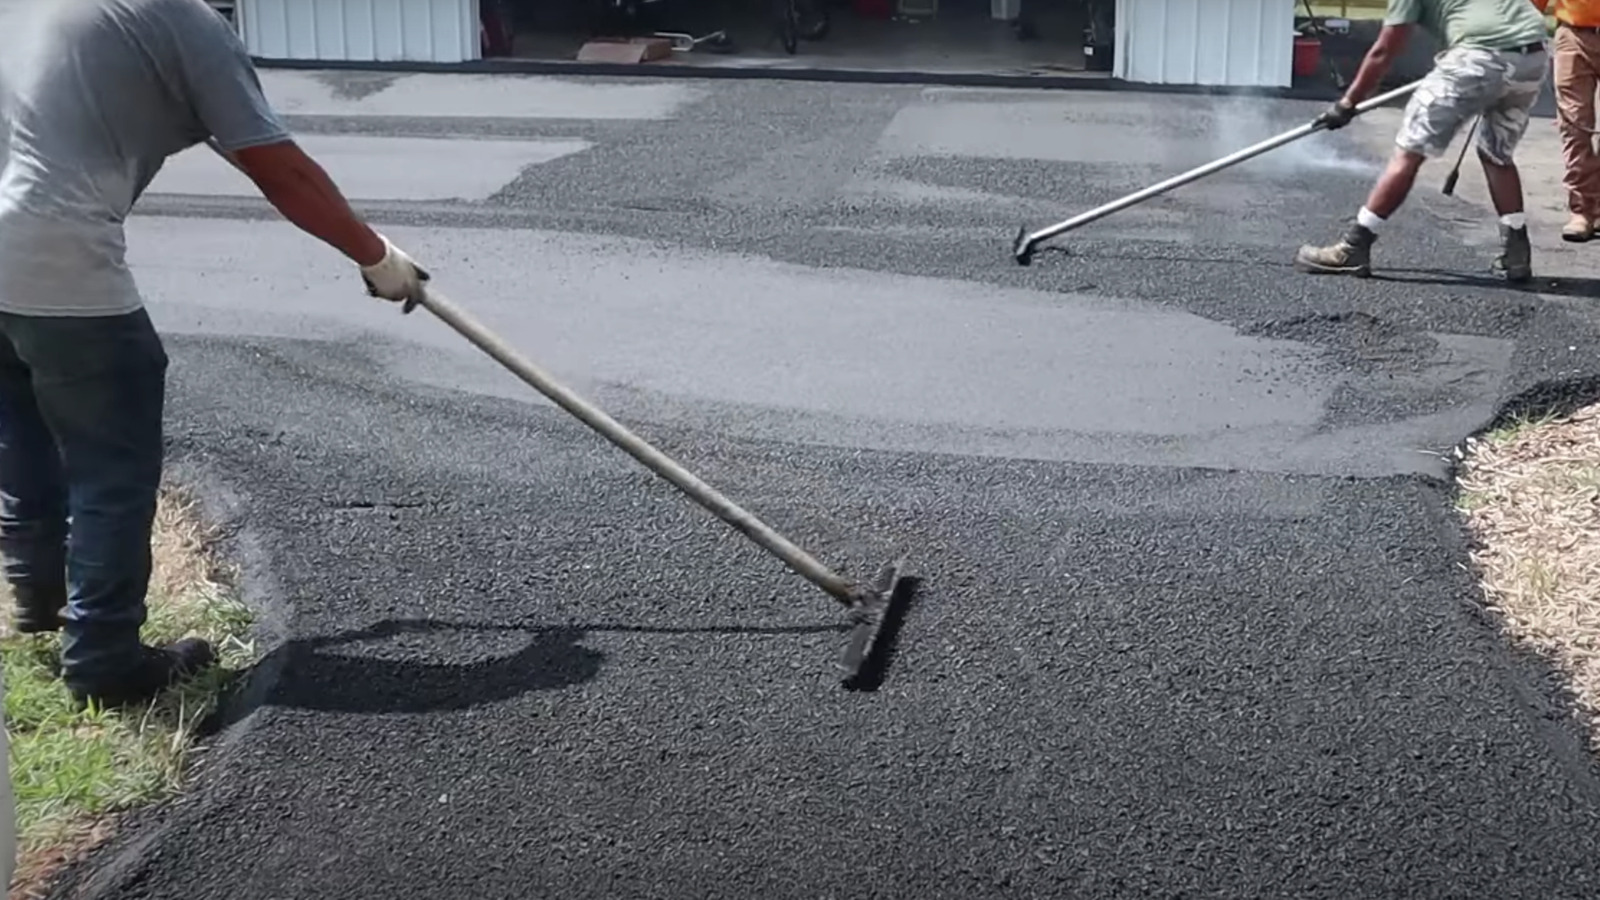 How Long Should You Stay Off a New Asphalt Driveway?